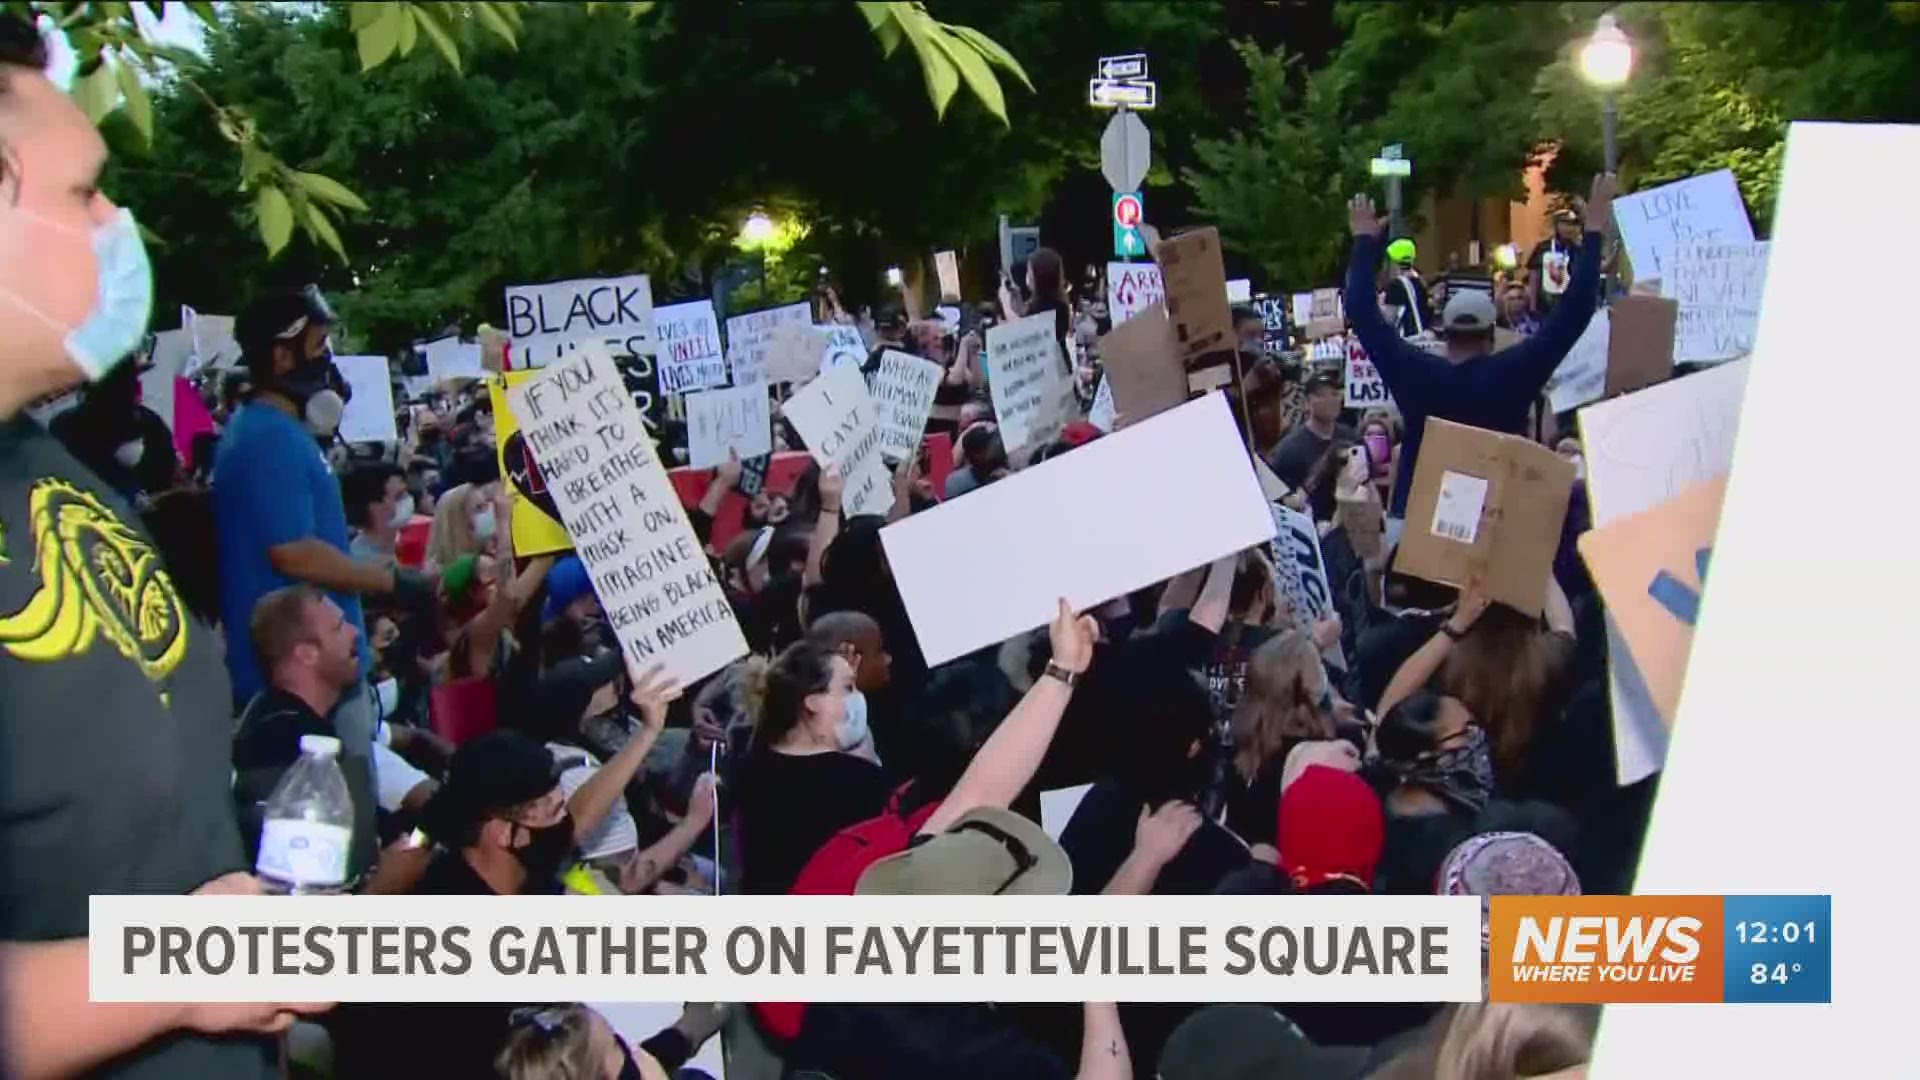 People gathered at the Fayetteville Square Tuesday to peacefully protest police brutality.